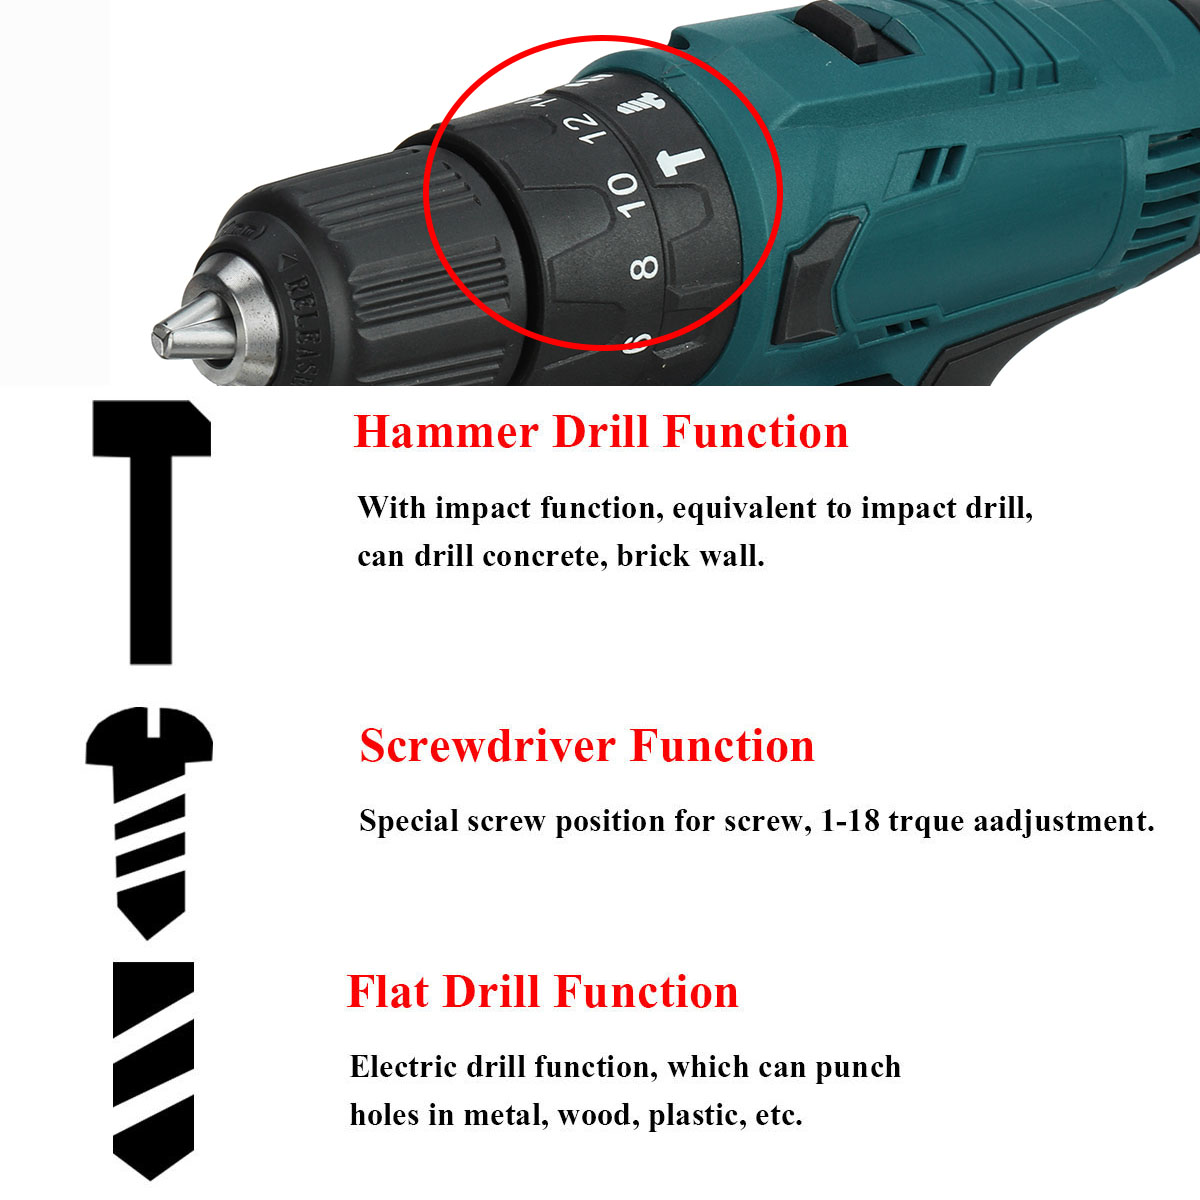 12V-1500mAh-3-IN-1-2-Speed-Cordless-Drill-Driver-Electric-Screwdriver-Hammer-Flat-Drill-183-Torque-1-1868432-4